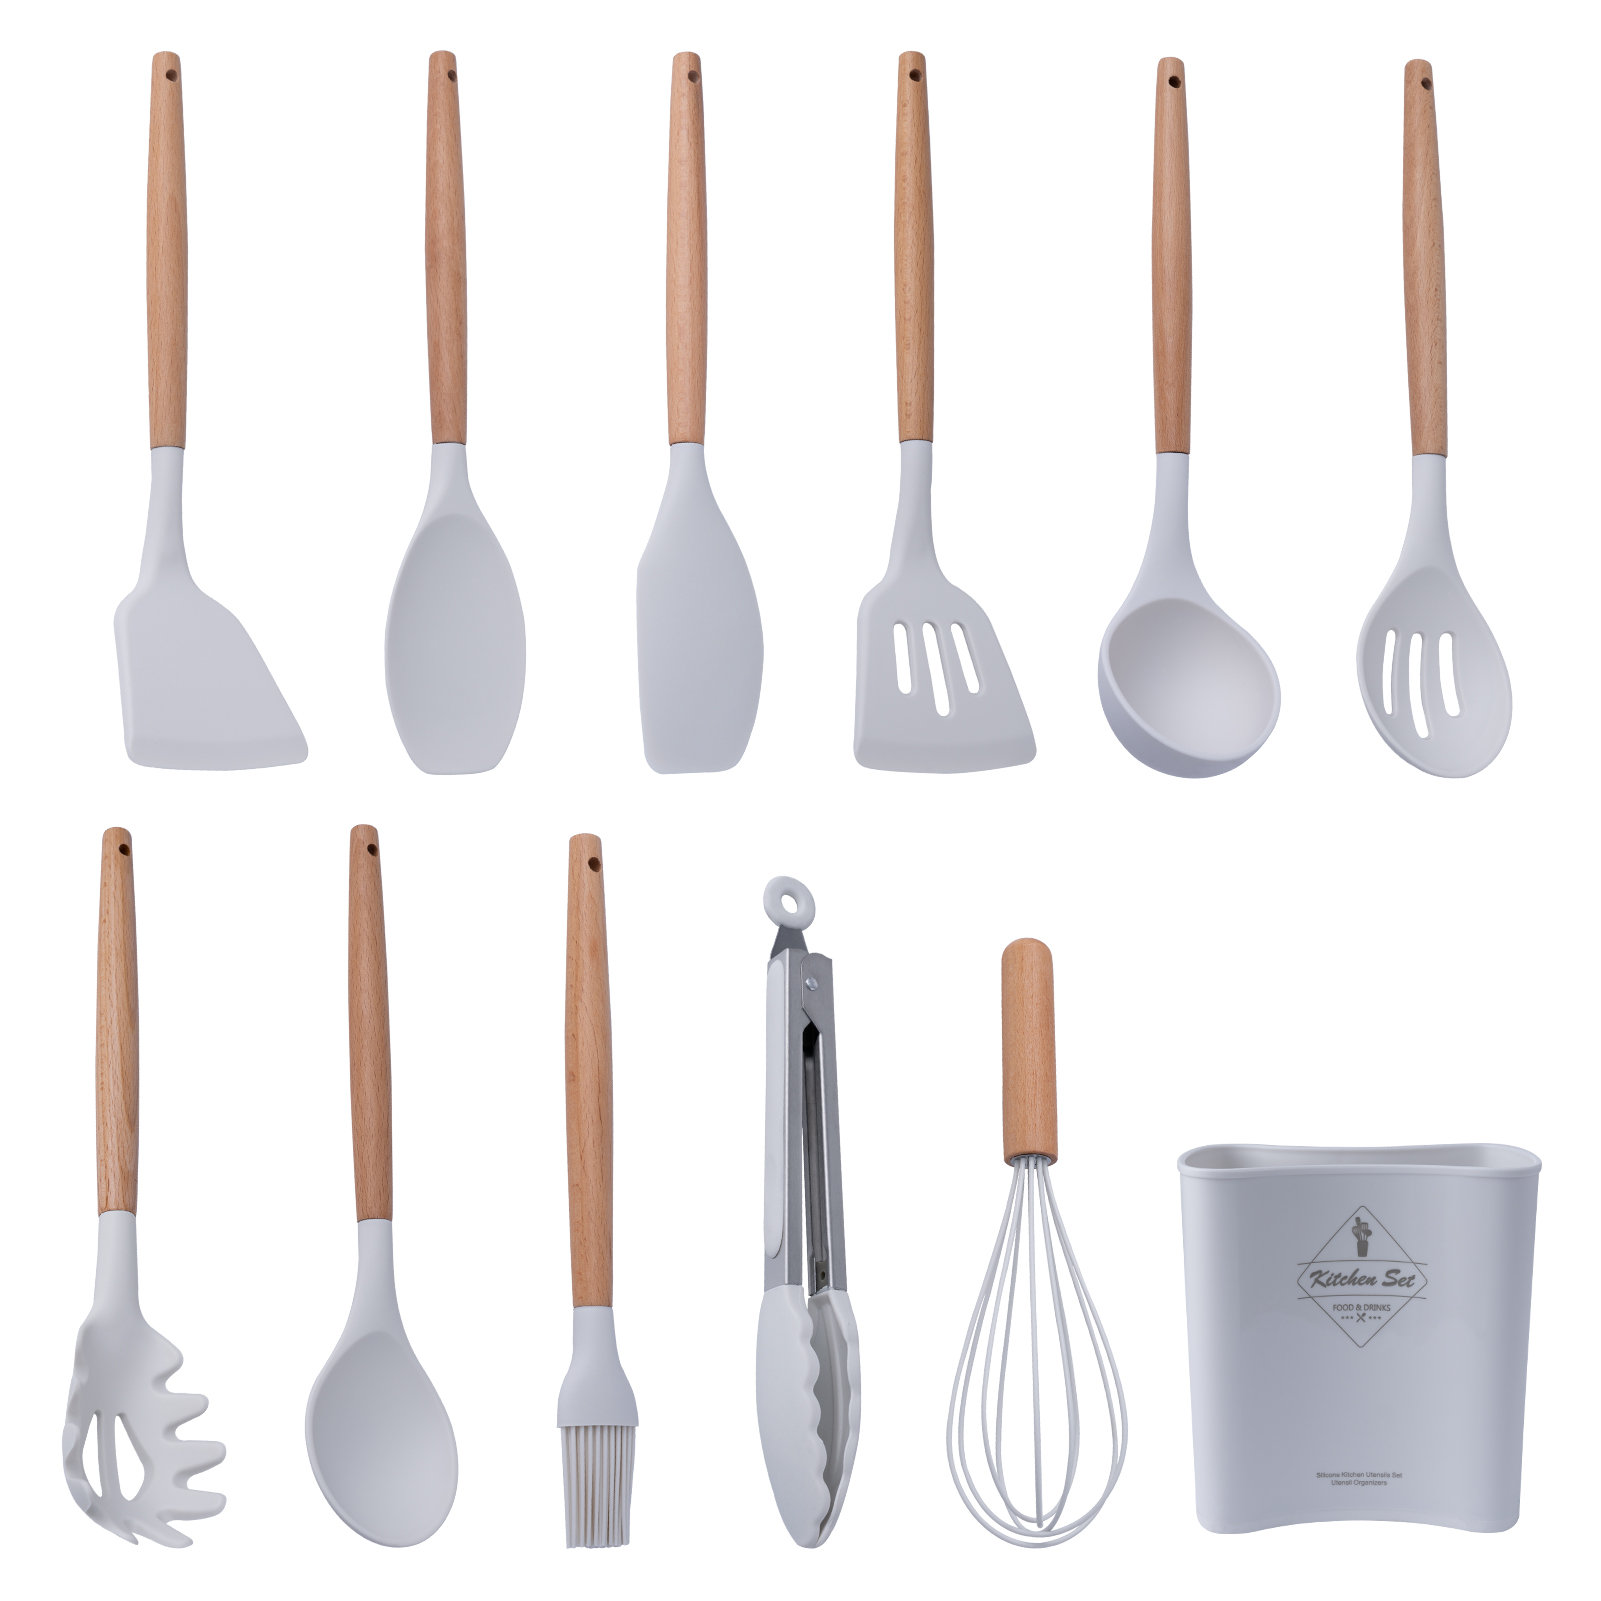 Silicone Cooking Cutlery Set 34 Pieces Non-Stick Heat Resistant Kitchen  Utensils Scraper Set with Wooden Handles Baking Cook